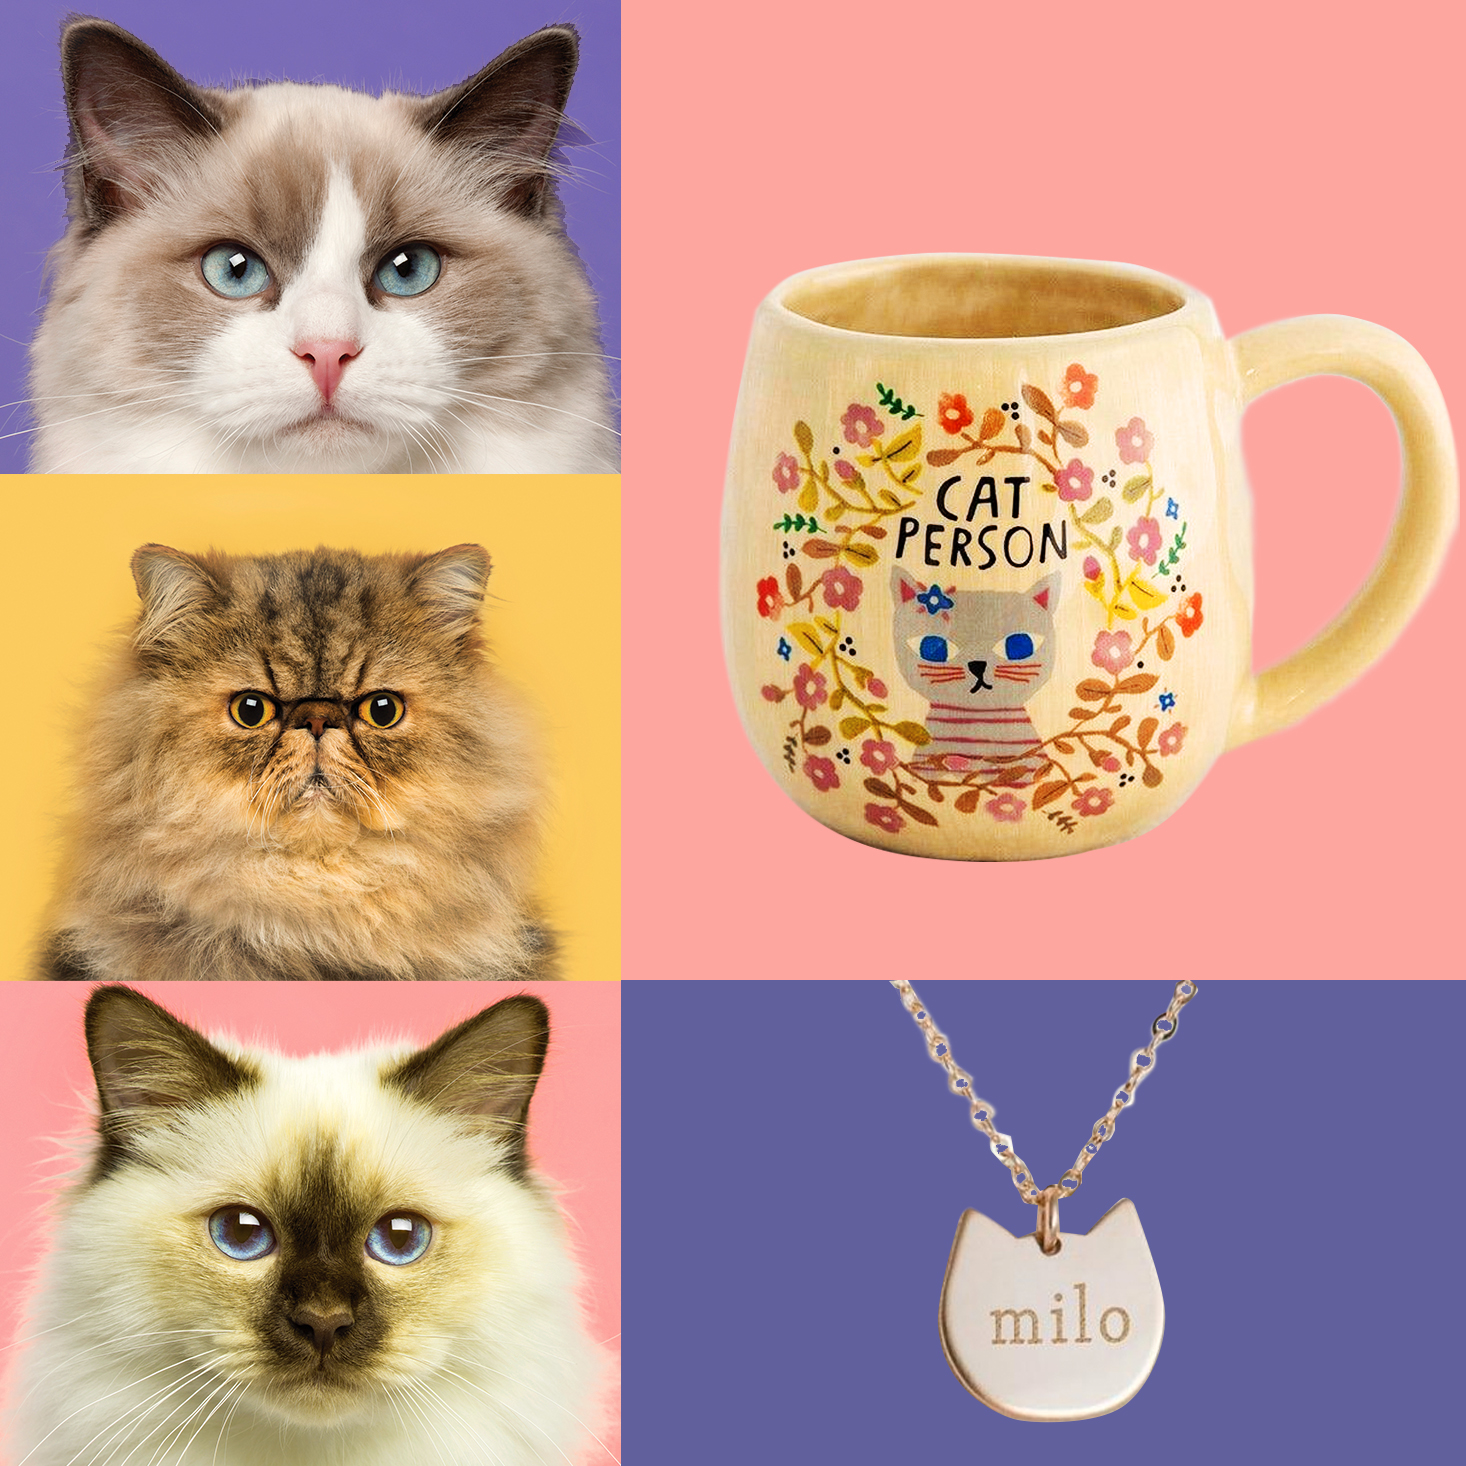 21 Purr-fect Gifts For Cat Lovers & Crazy Cat Ladies